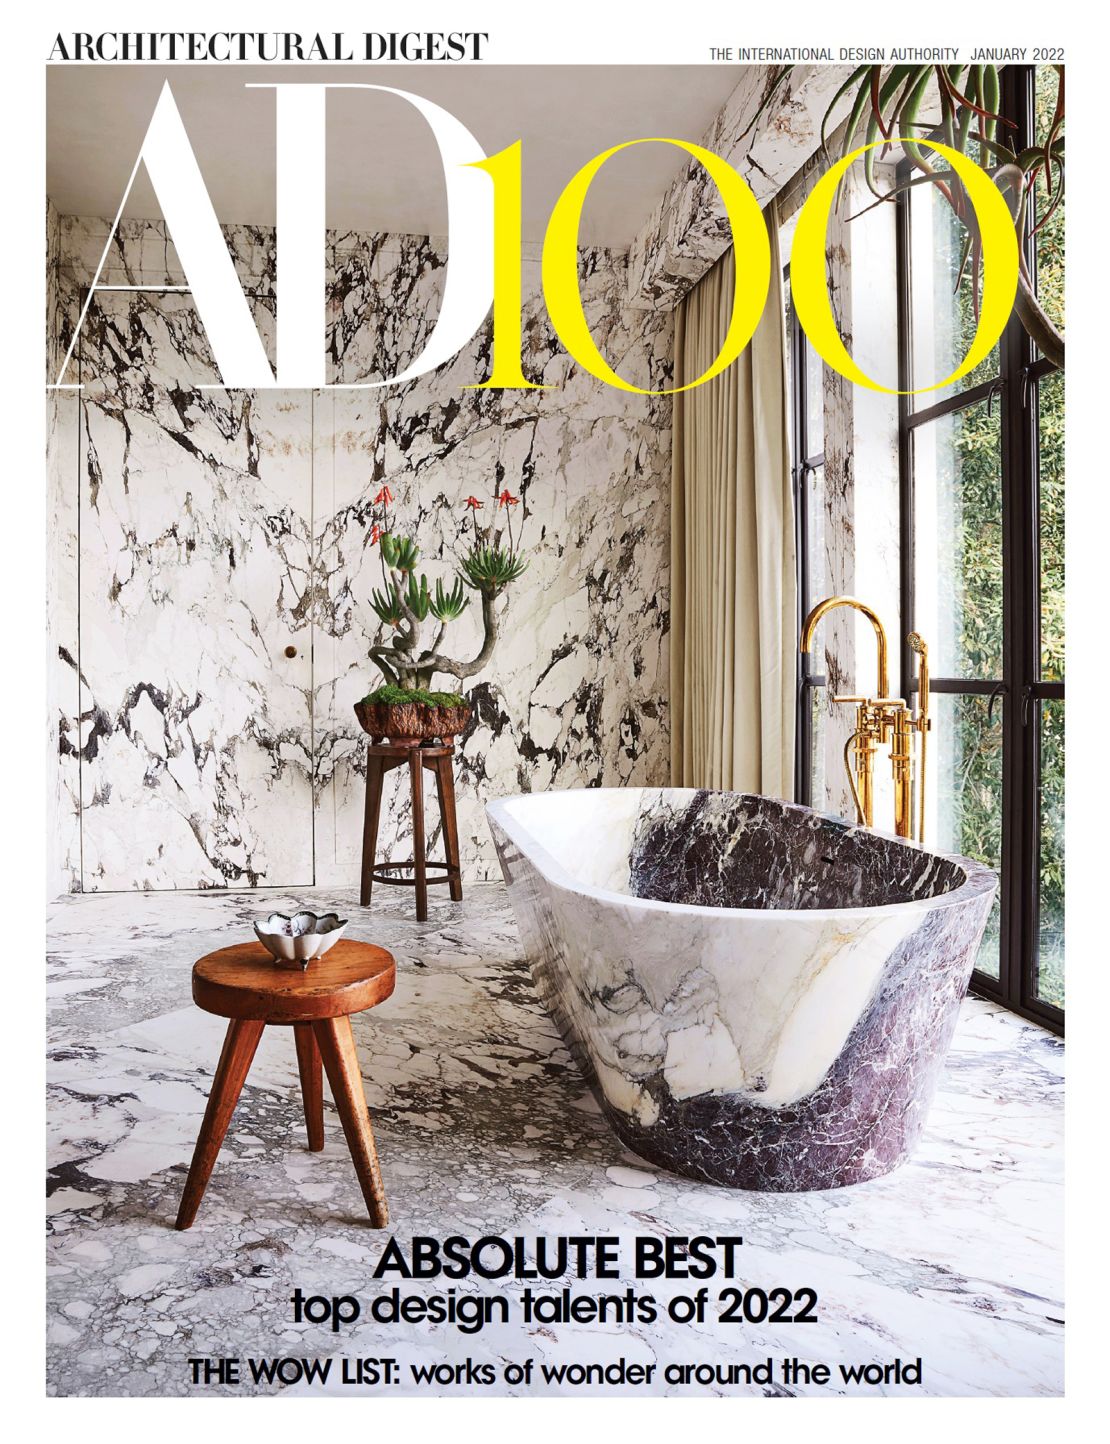 The WOW List is part of Architectural Digest's first global issue and was selected by AD editors from around the world. 